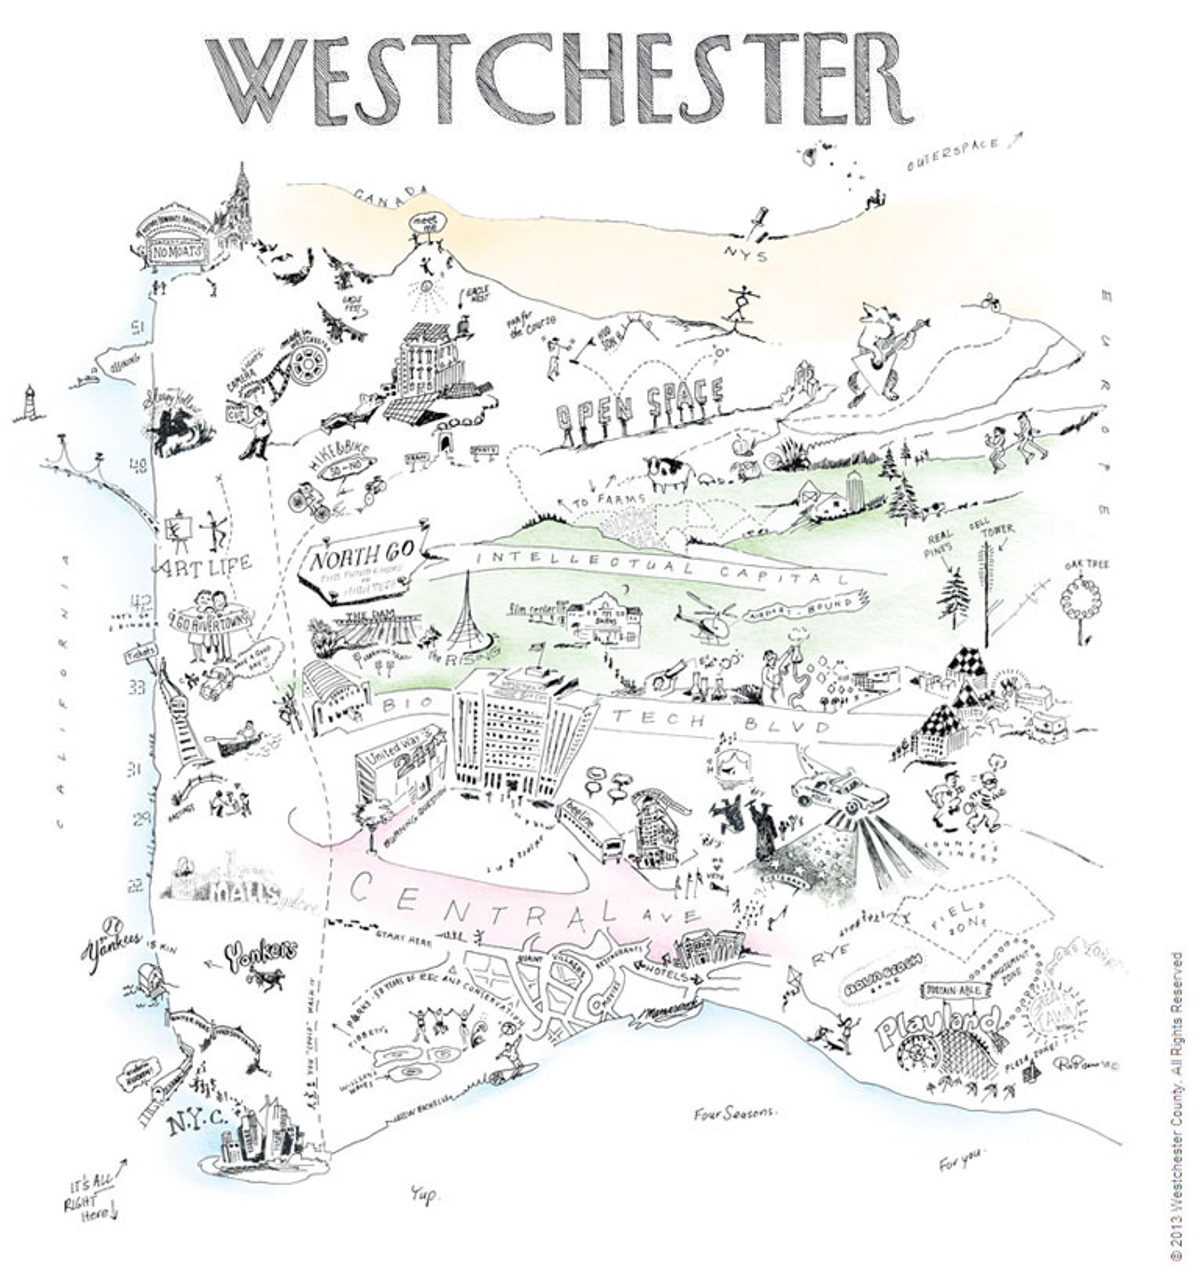 11 Things That People from (Lower) Westchester, New York Can Relate To